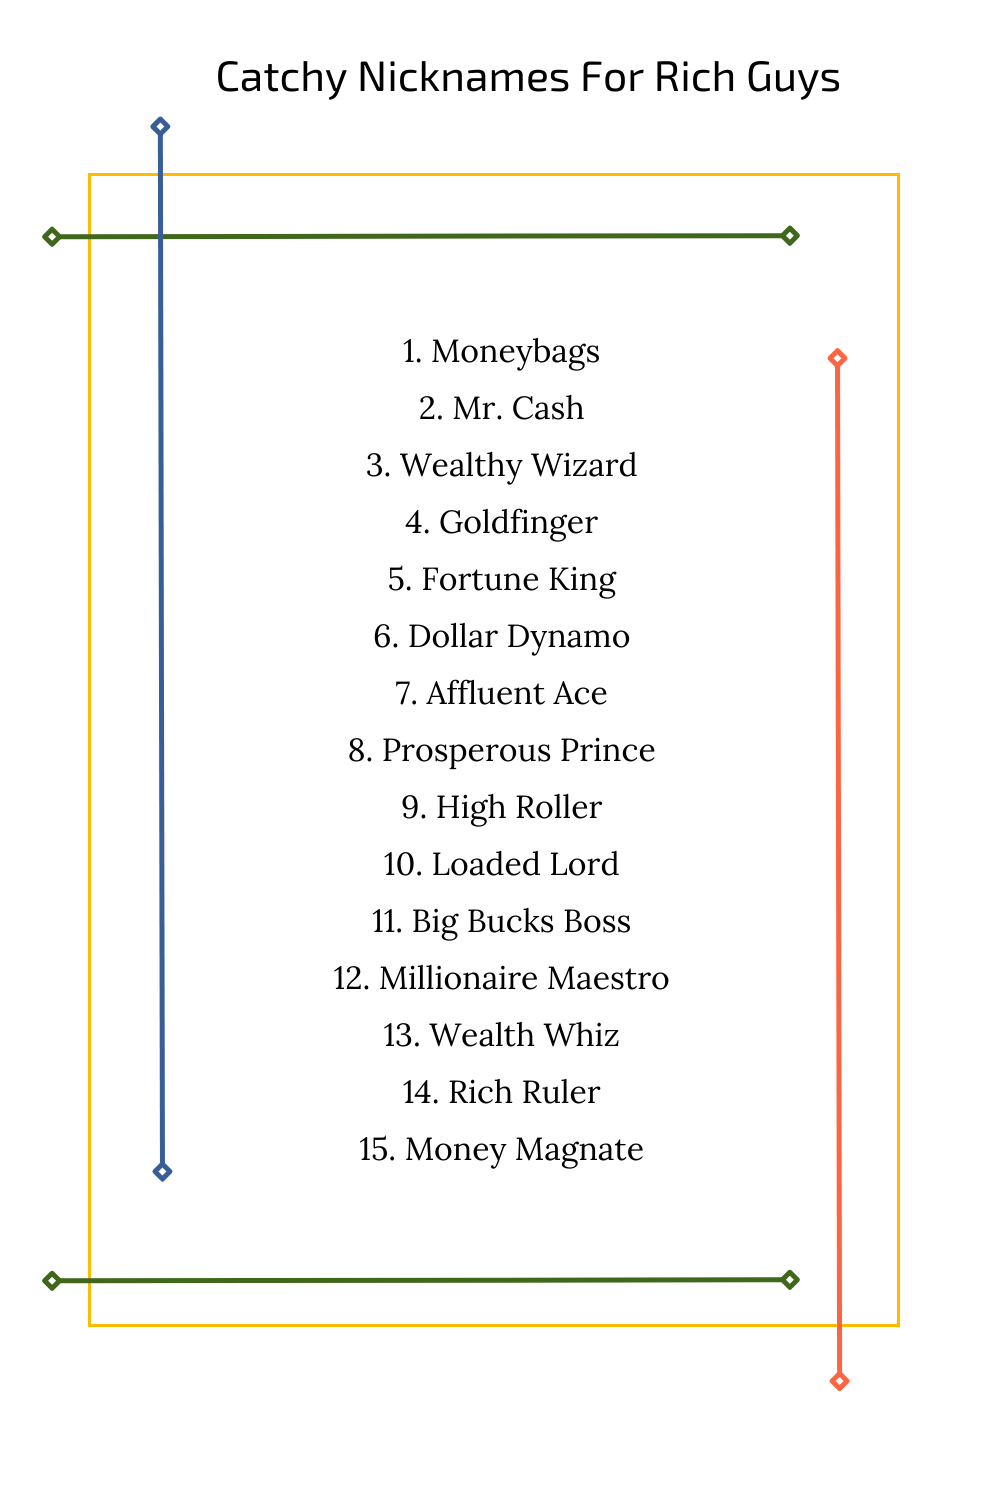 Catchy Nicknames For Rich Guys